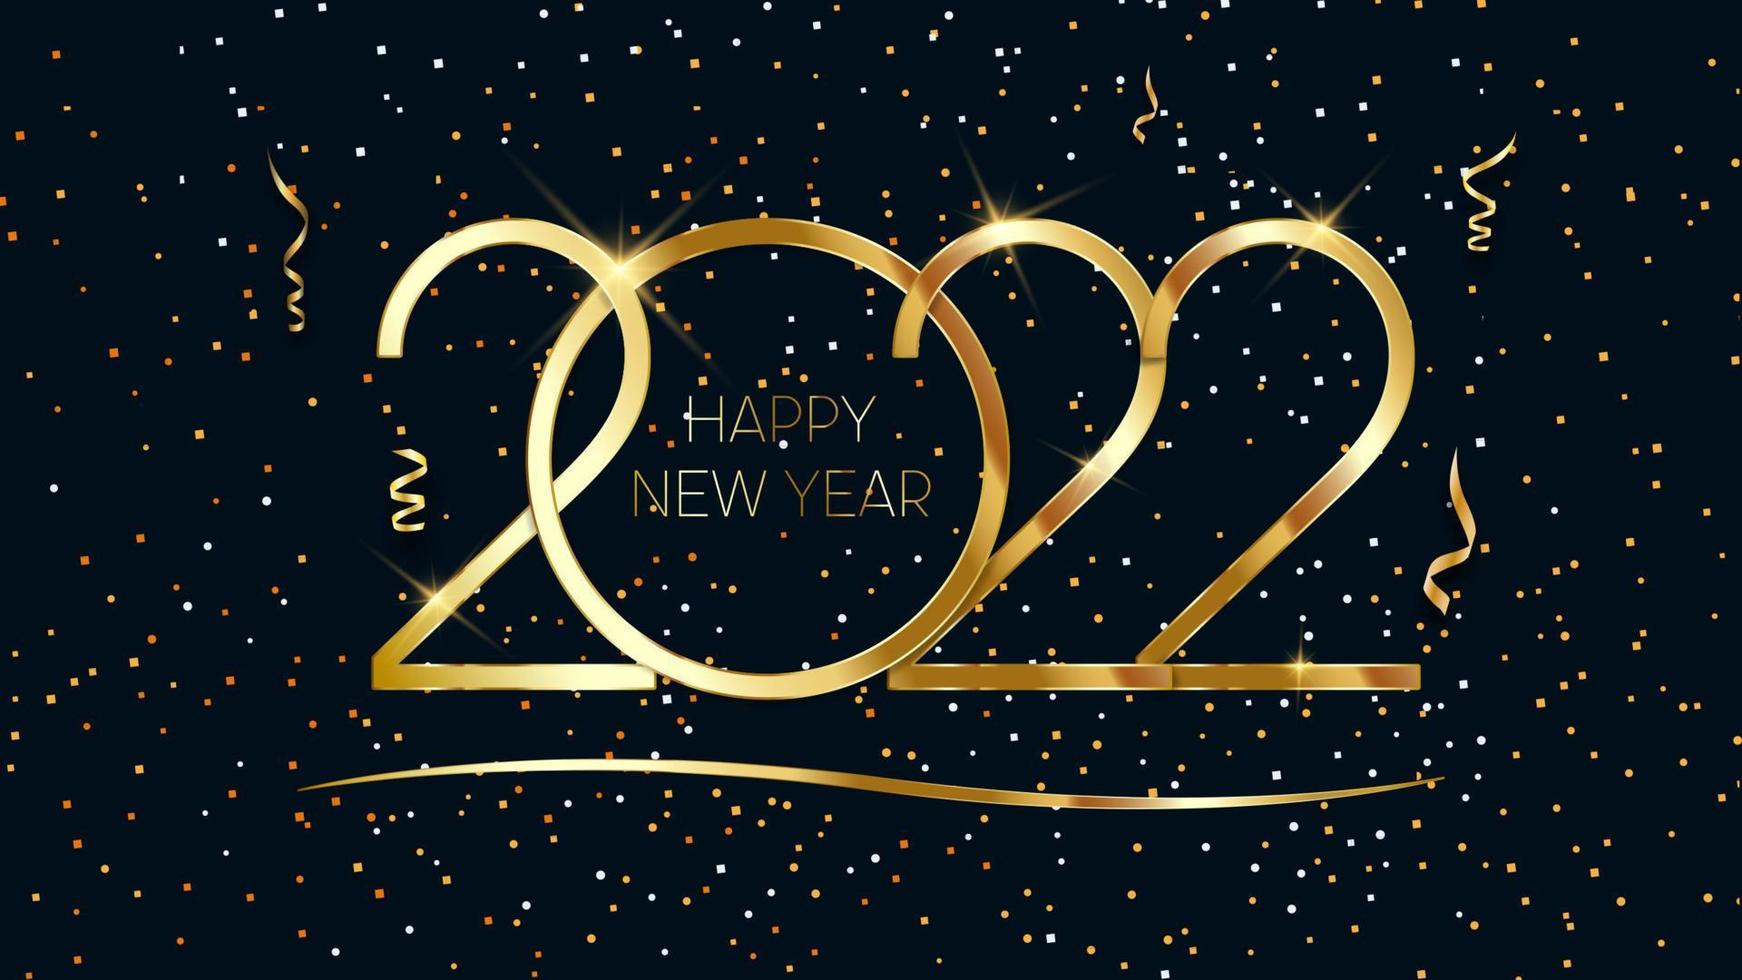 Happy New Year 2022. Elegant gold text with light. Vector illustration.